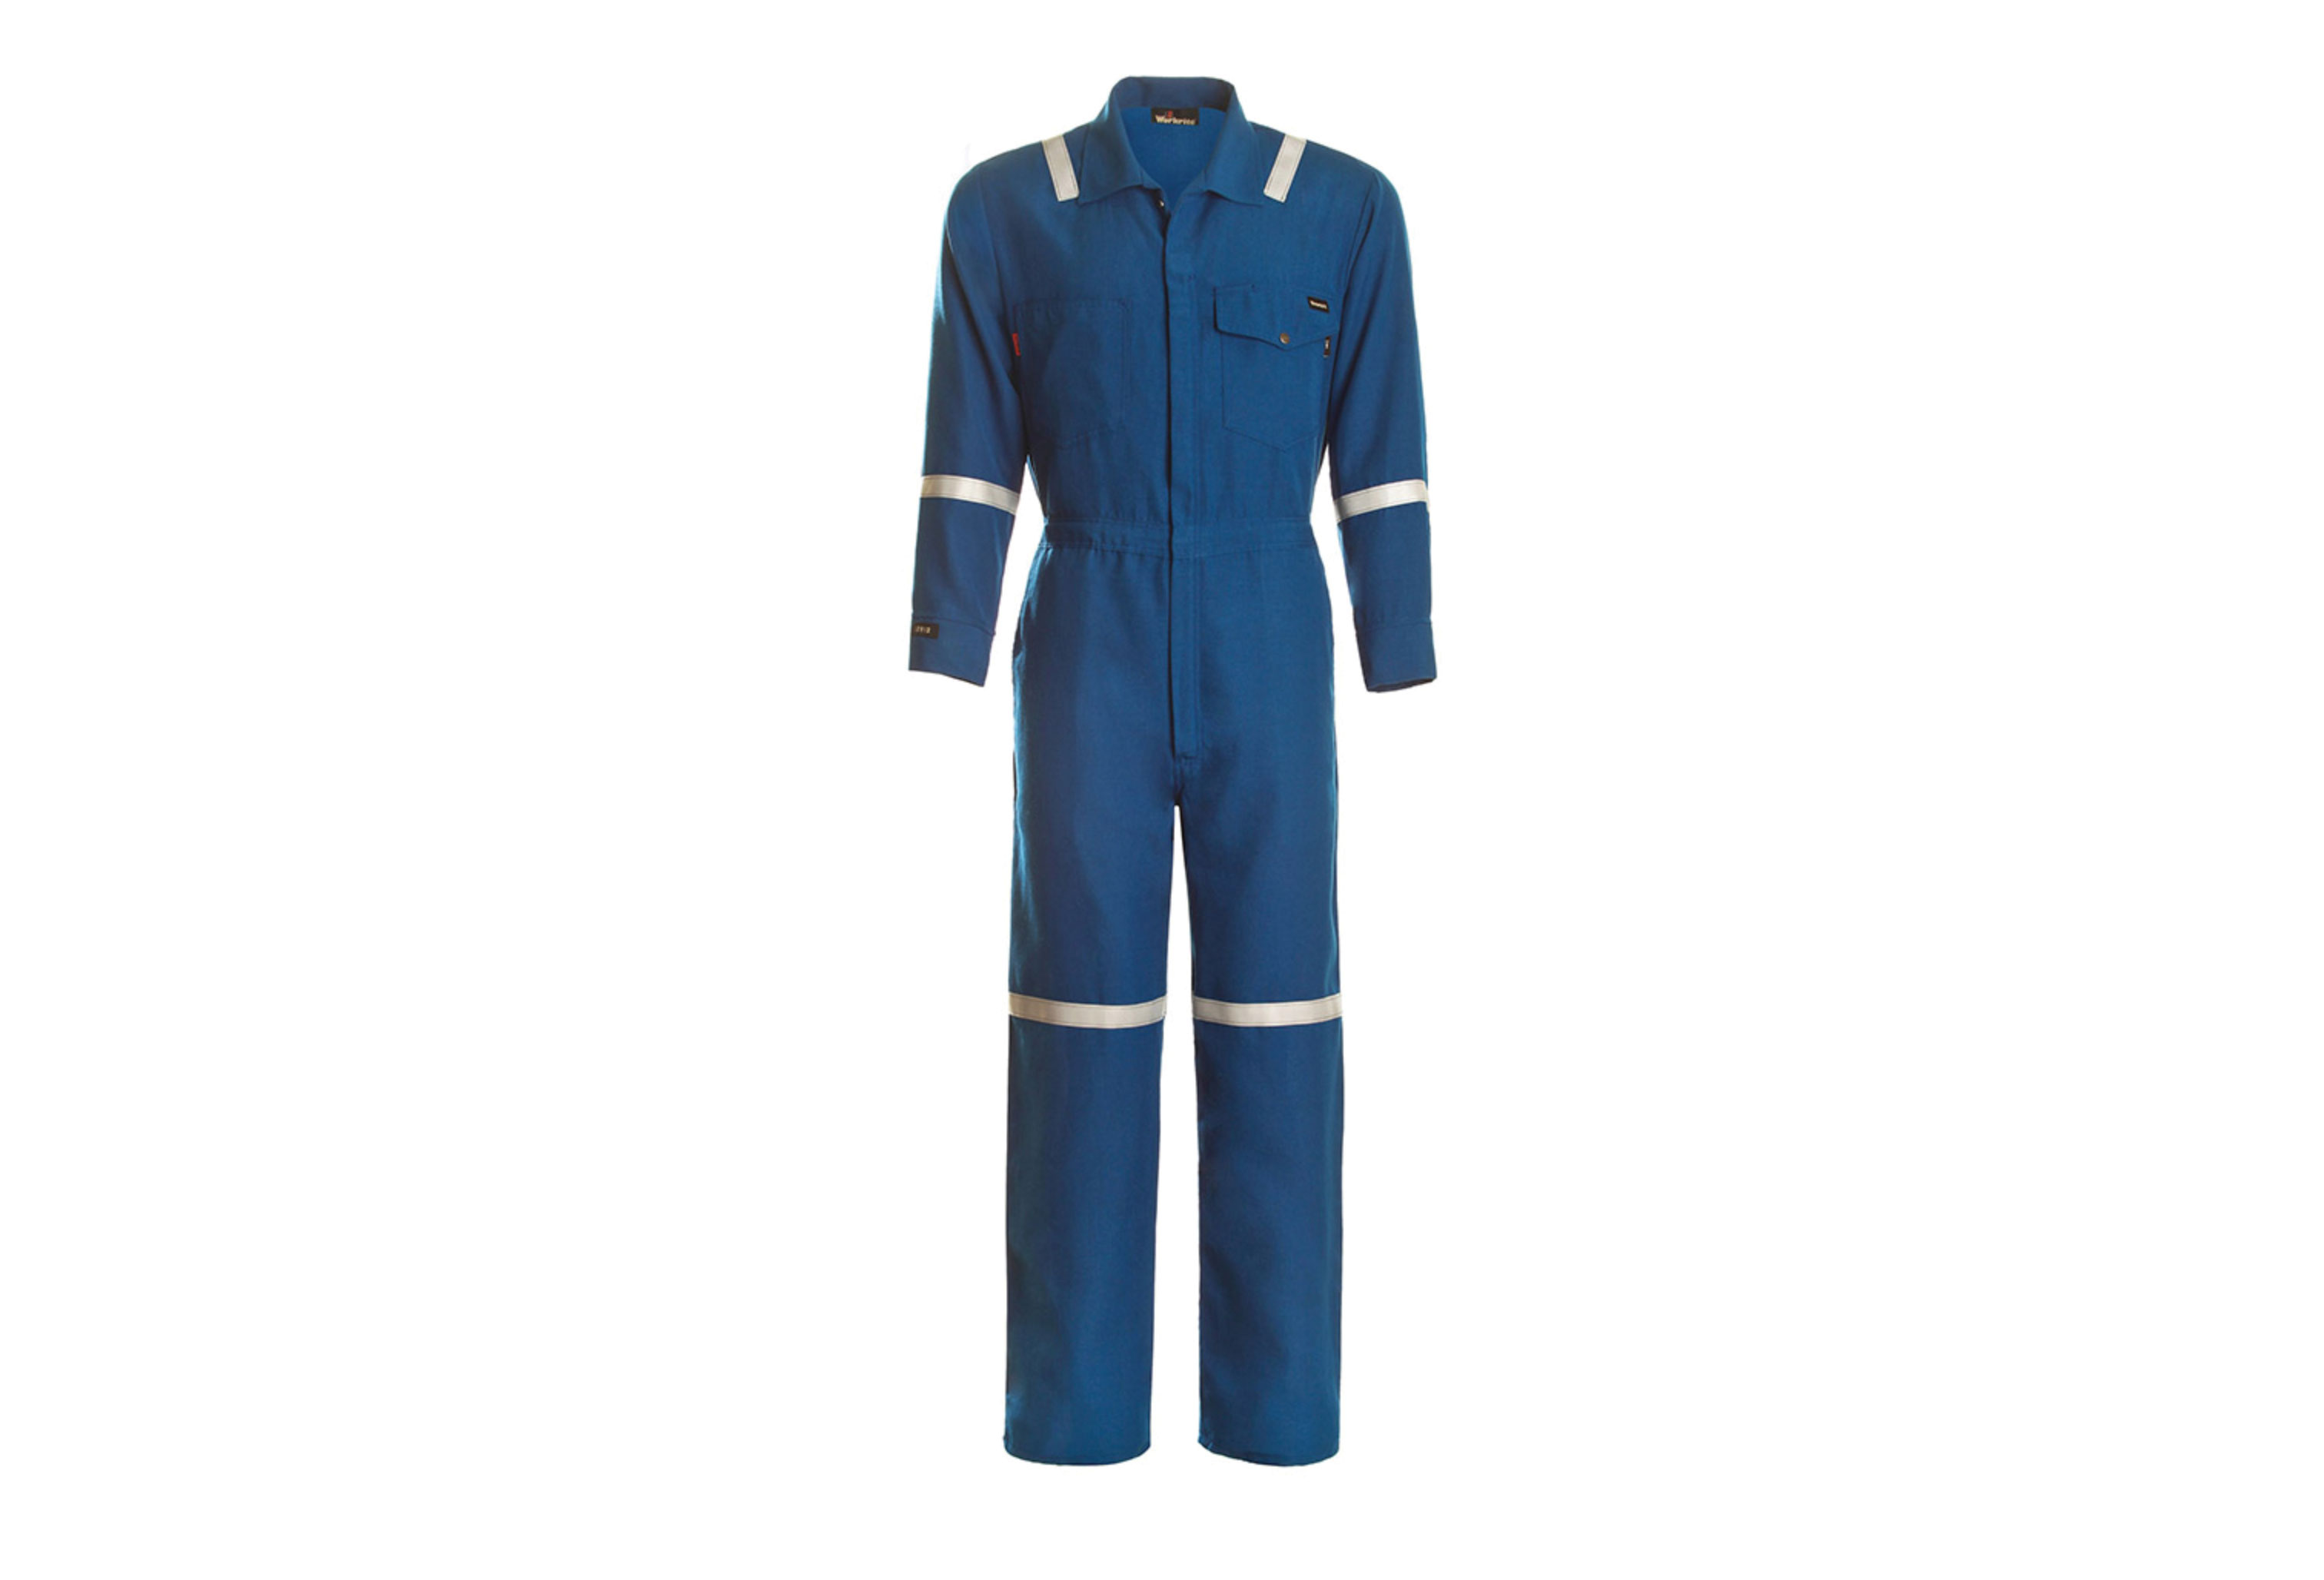 Workrite Uniform Co.'s industrial coverall